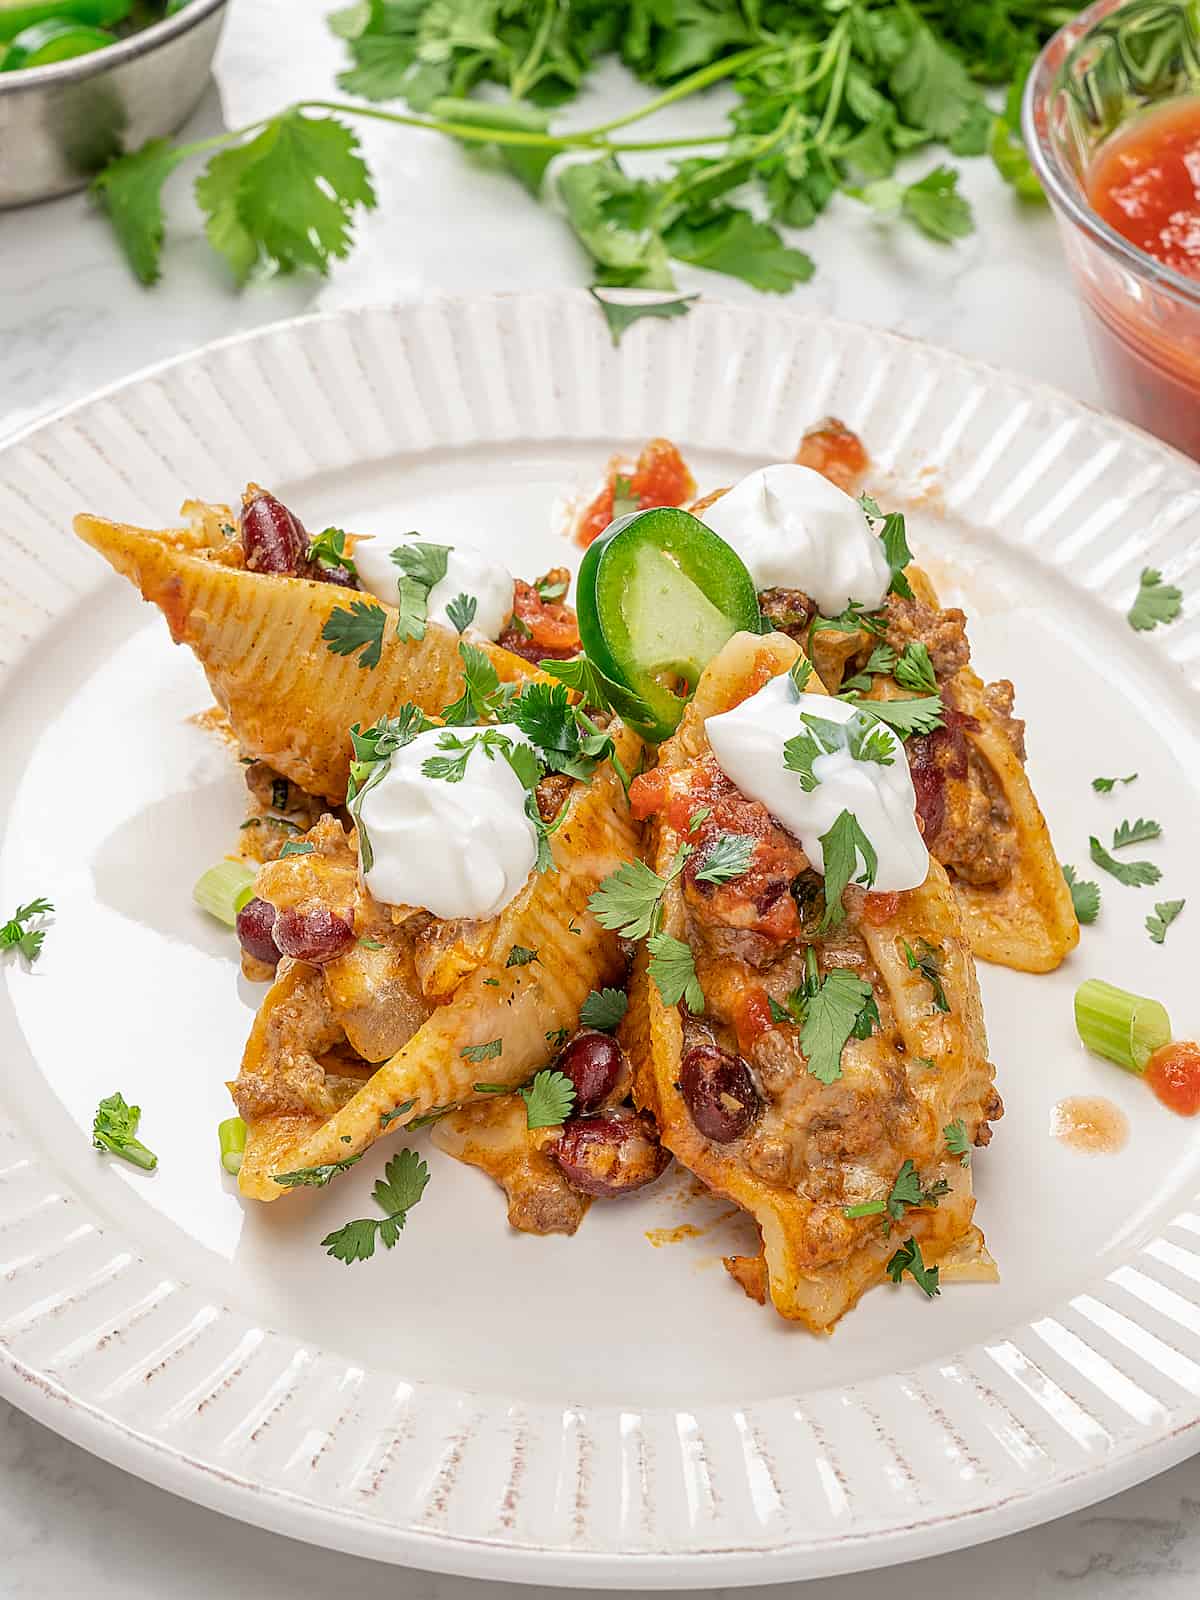 Taco stuffed shells on plate with sour cream and garnishes